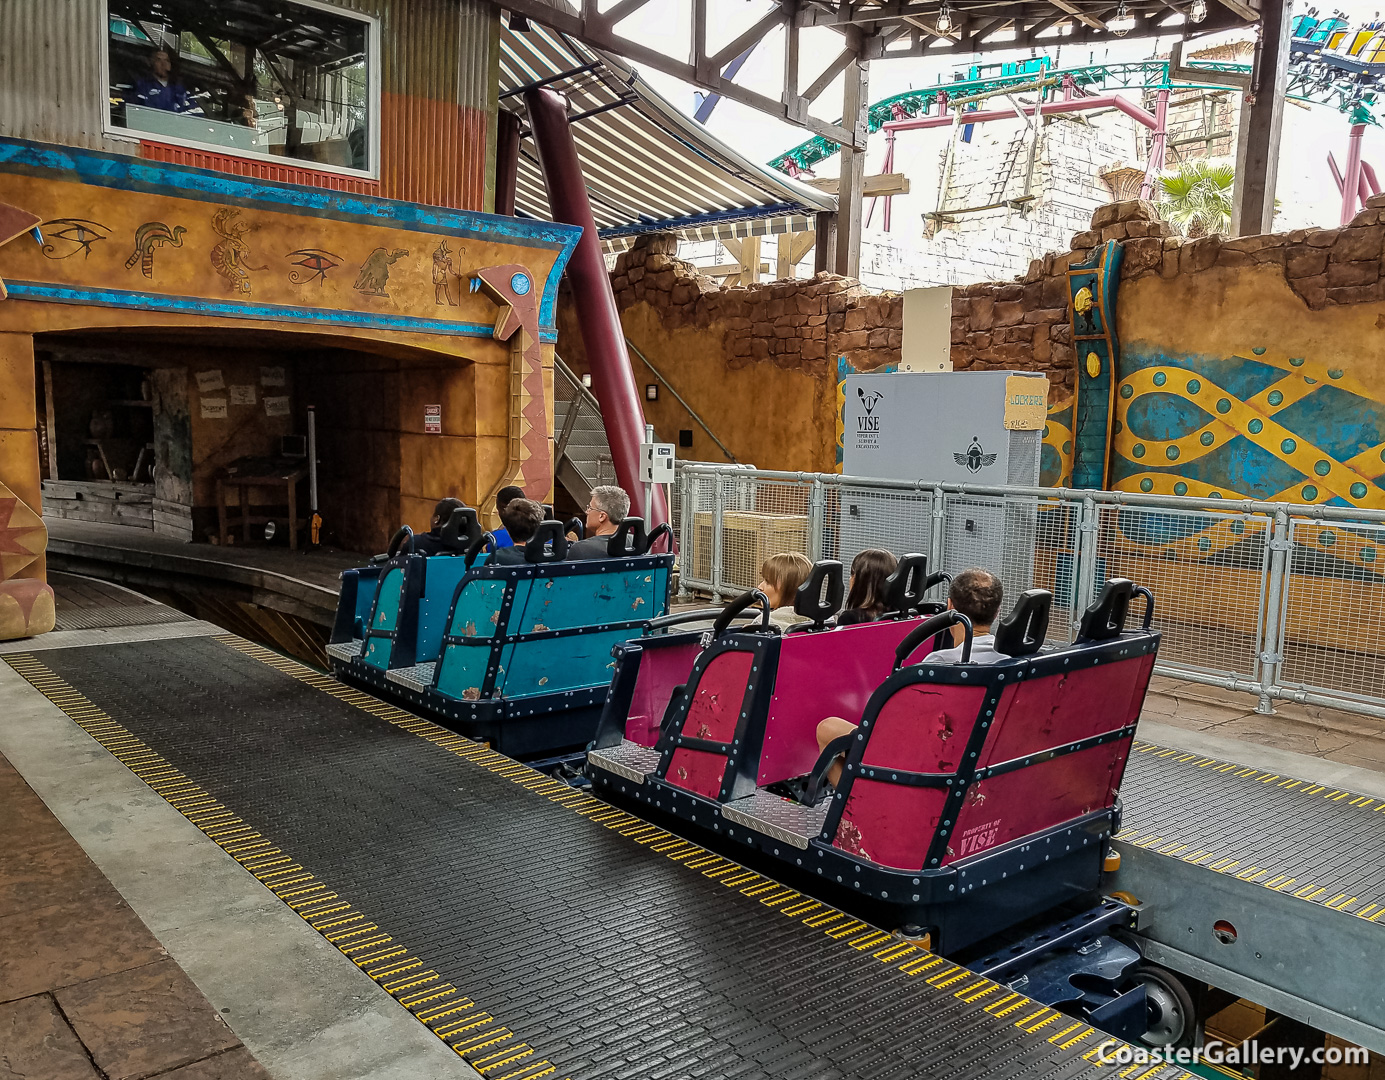 Moving walkway next to a roller coaster. Cobra's Curse is surrounded by Egyptian ruins.